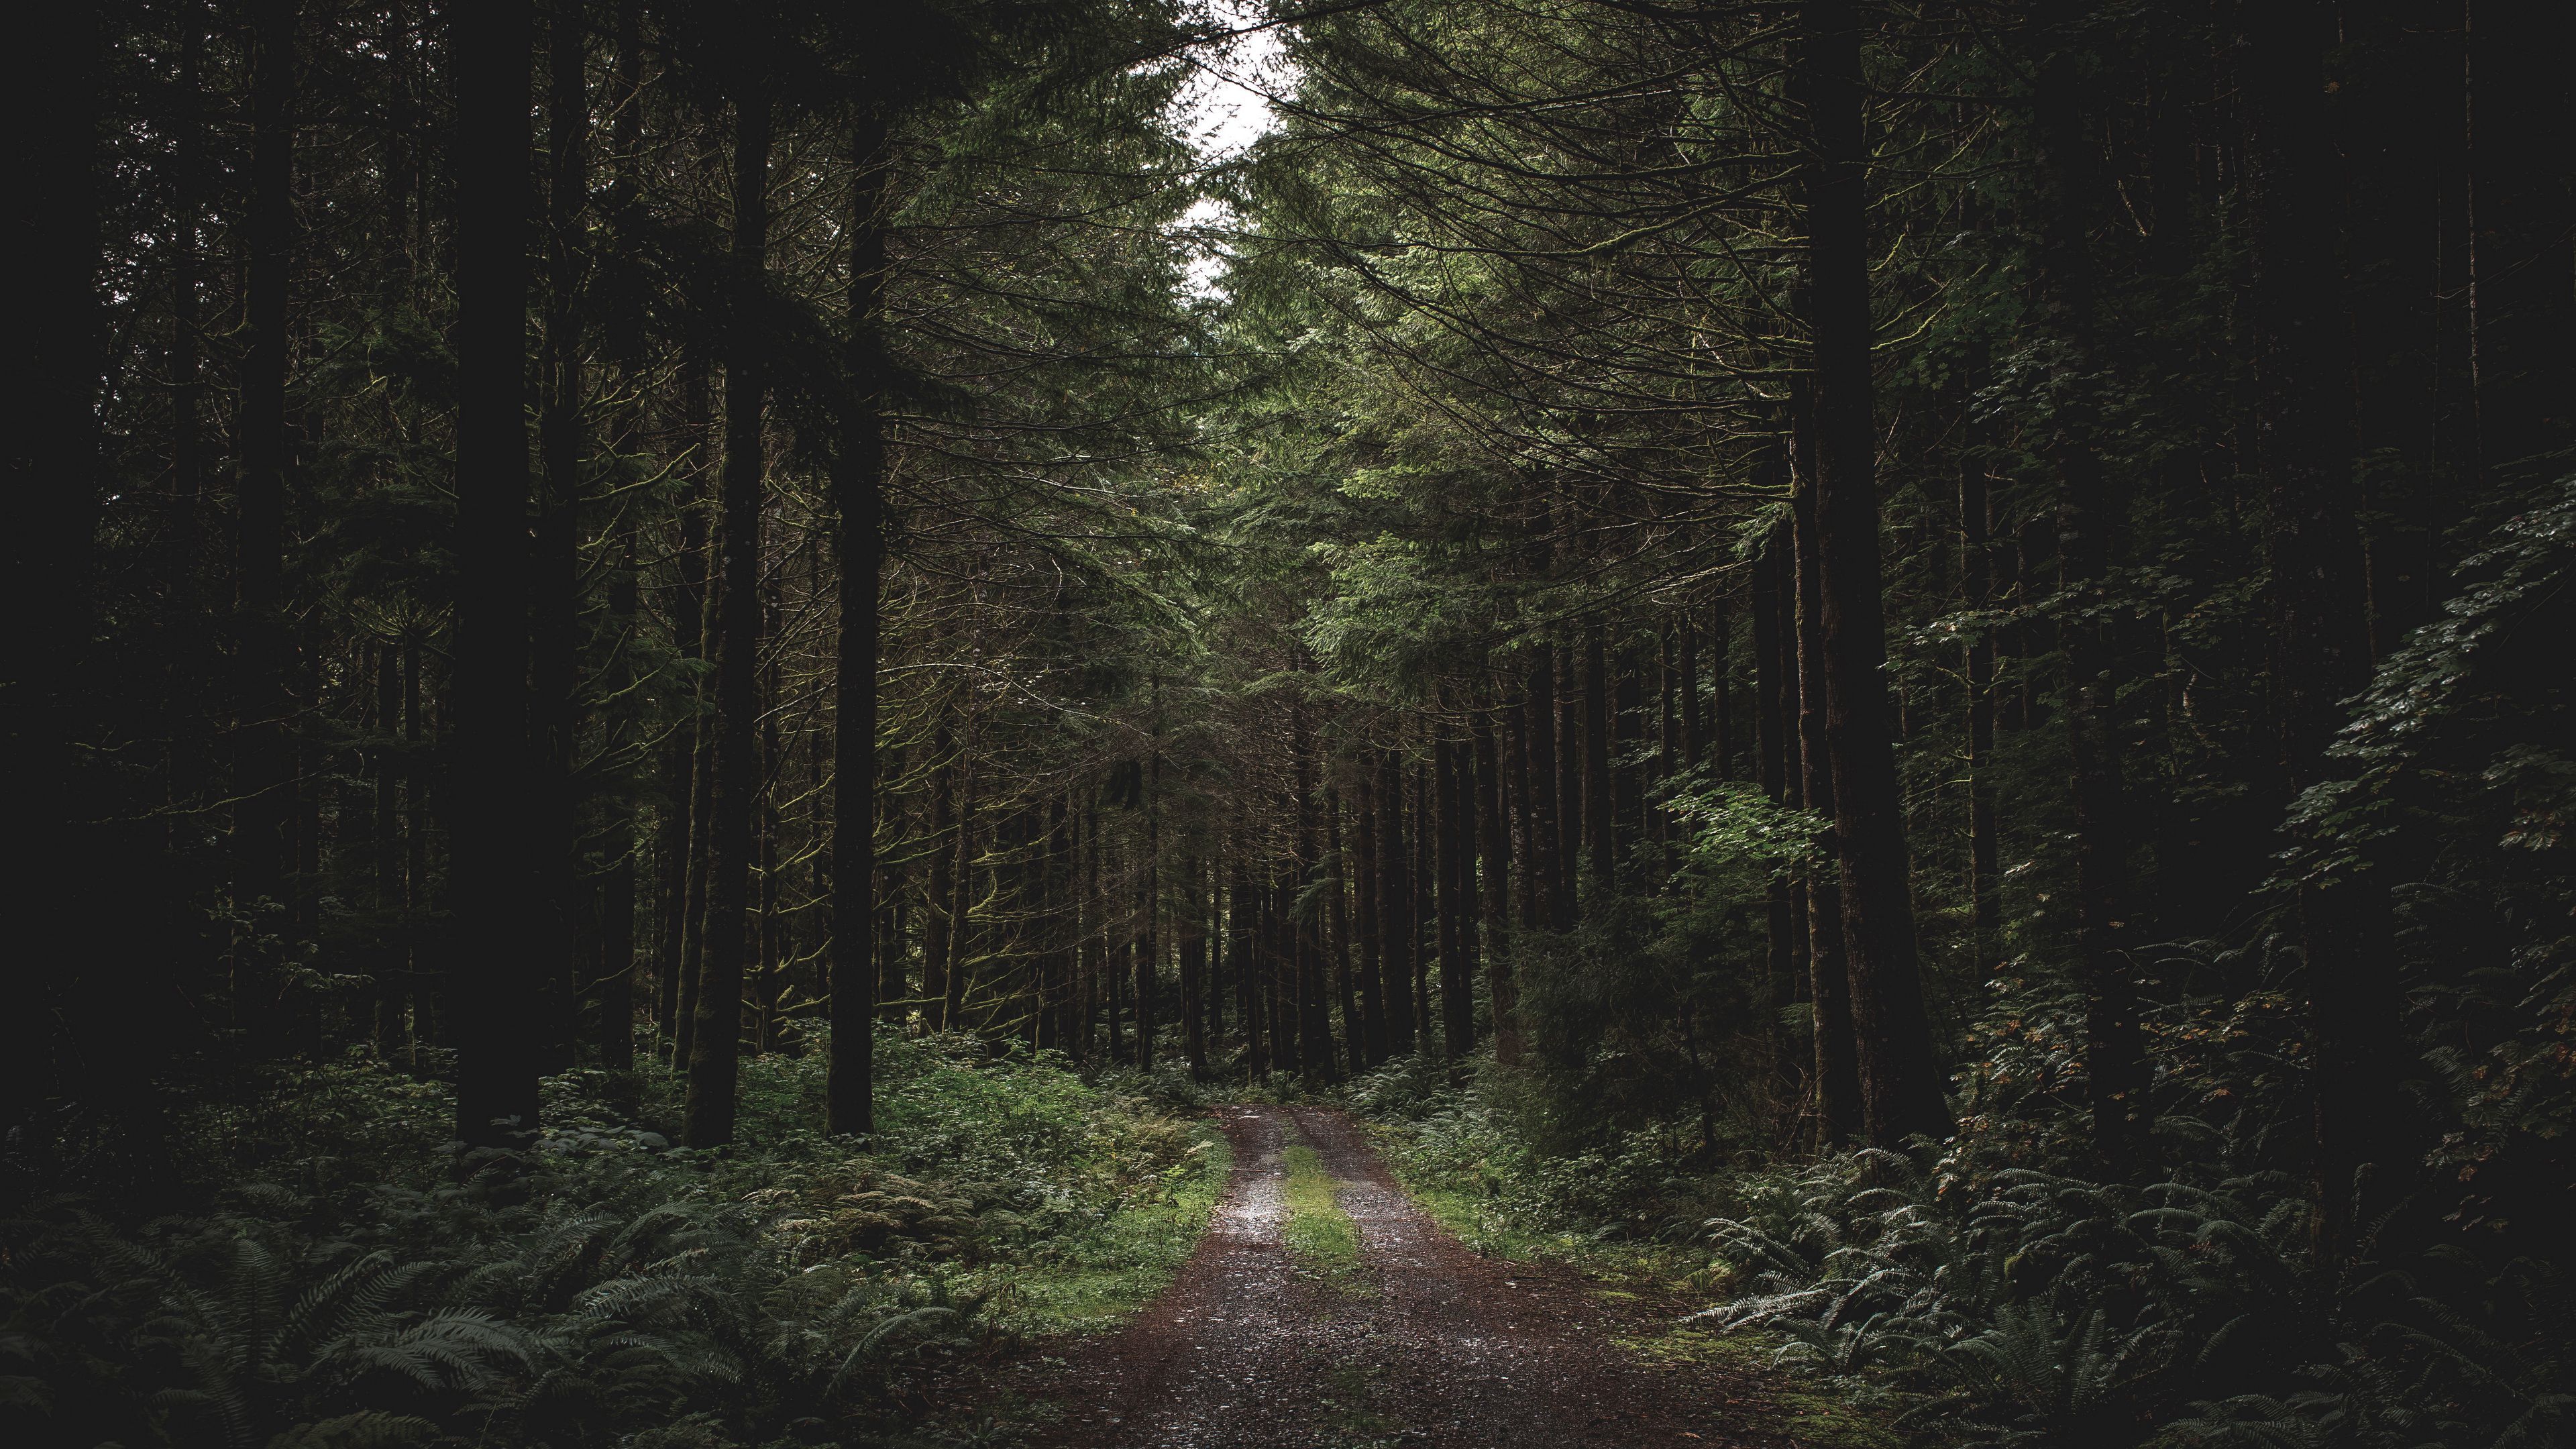 Download wallpaper 3840x2160 forest, path, trees, grass, evening